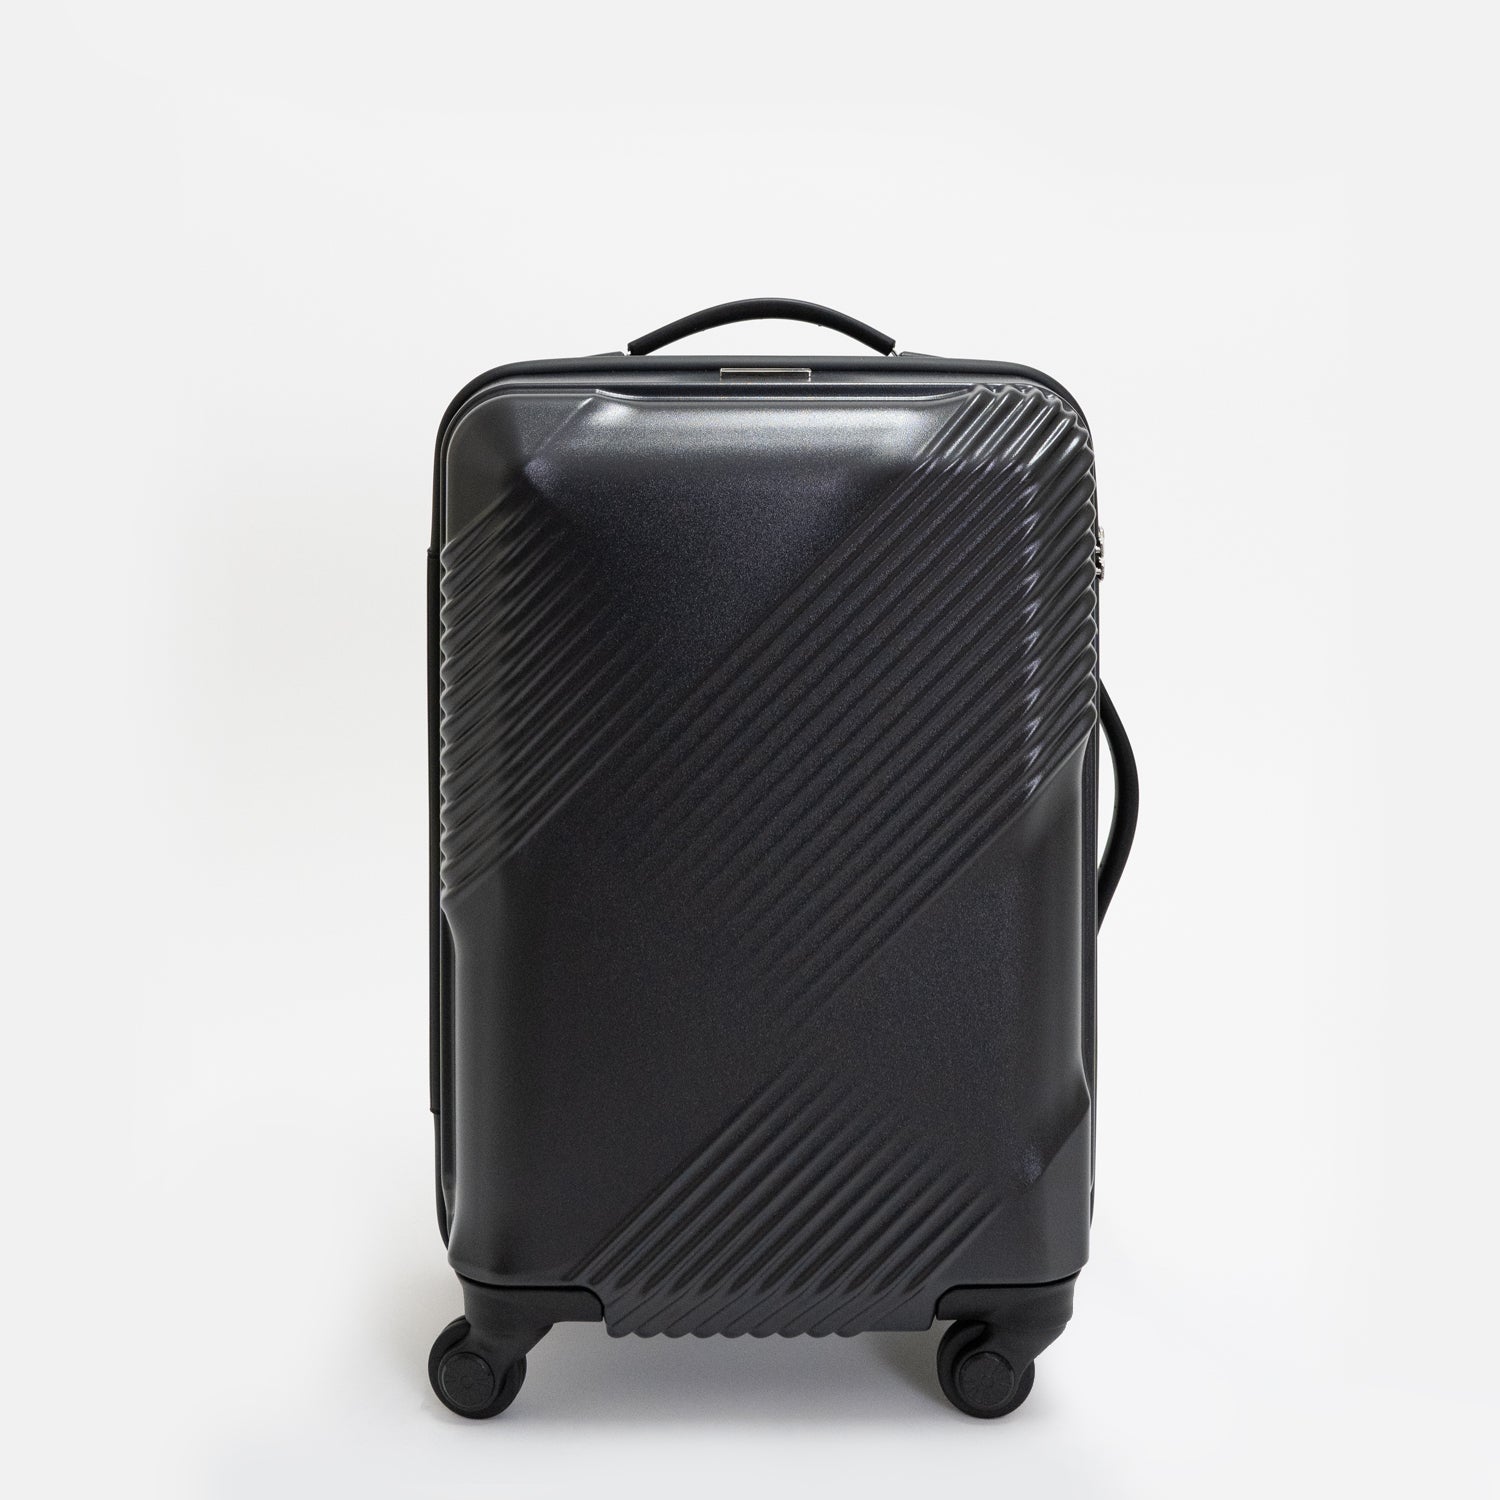 Glide 100%リサイクルシェルスーツケース CABIN_No.5700177 – ACE LUGGAGE